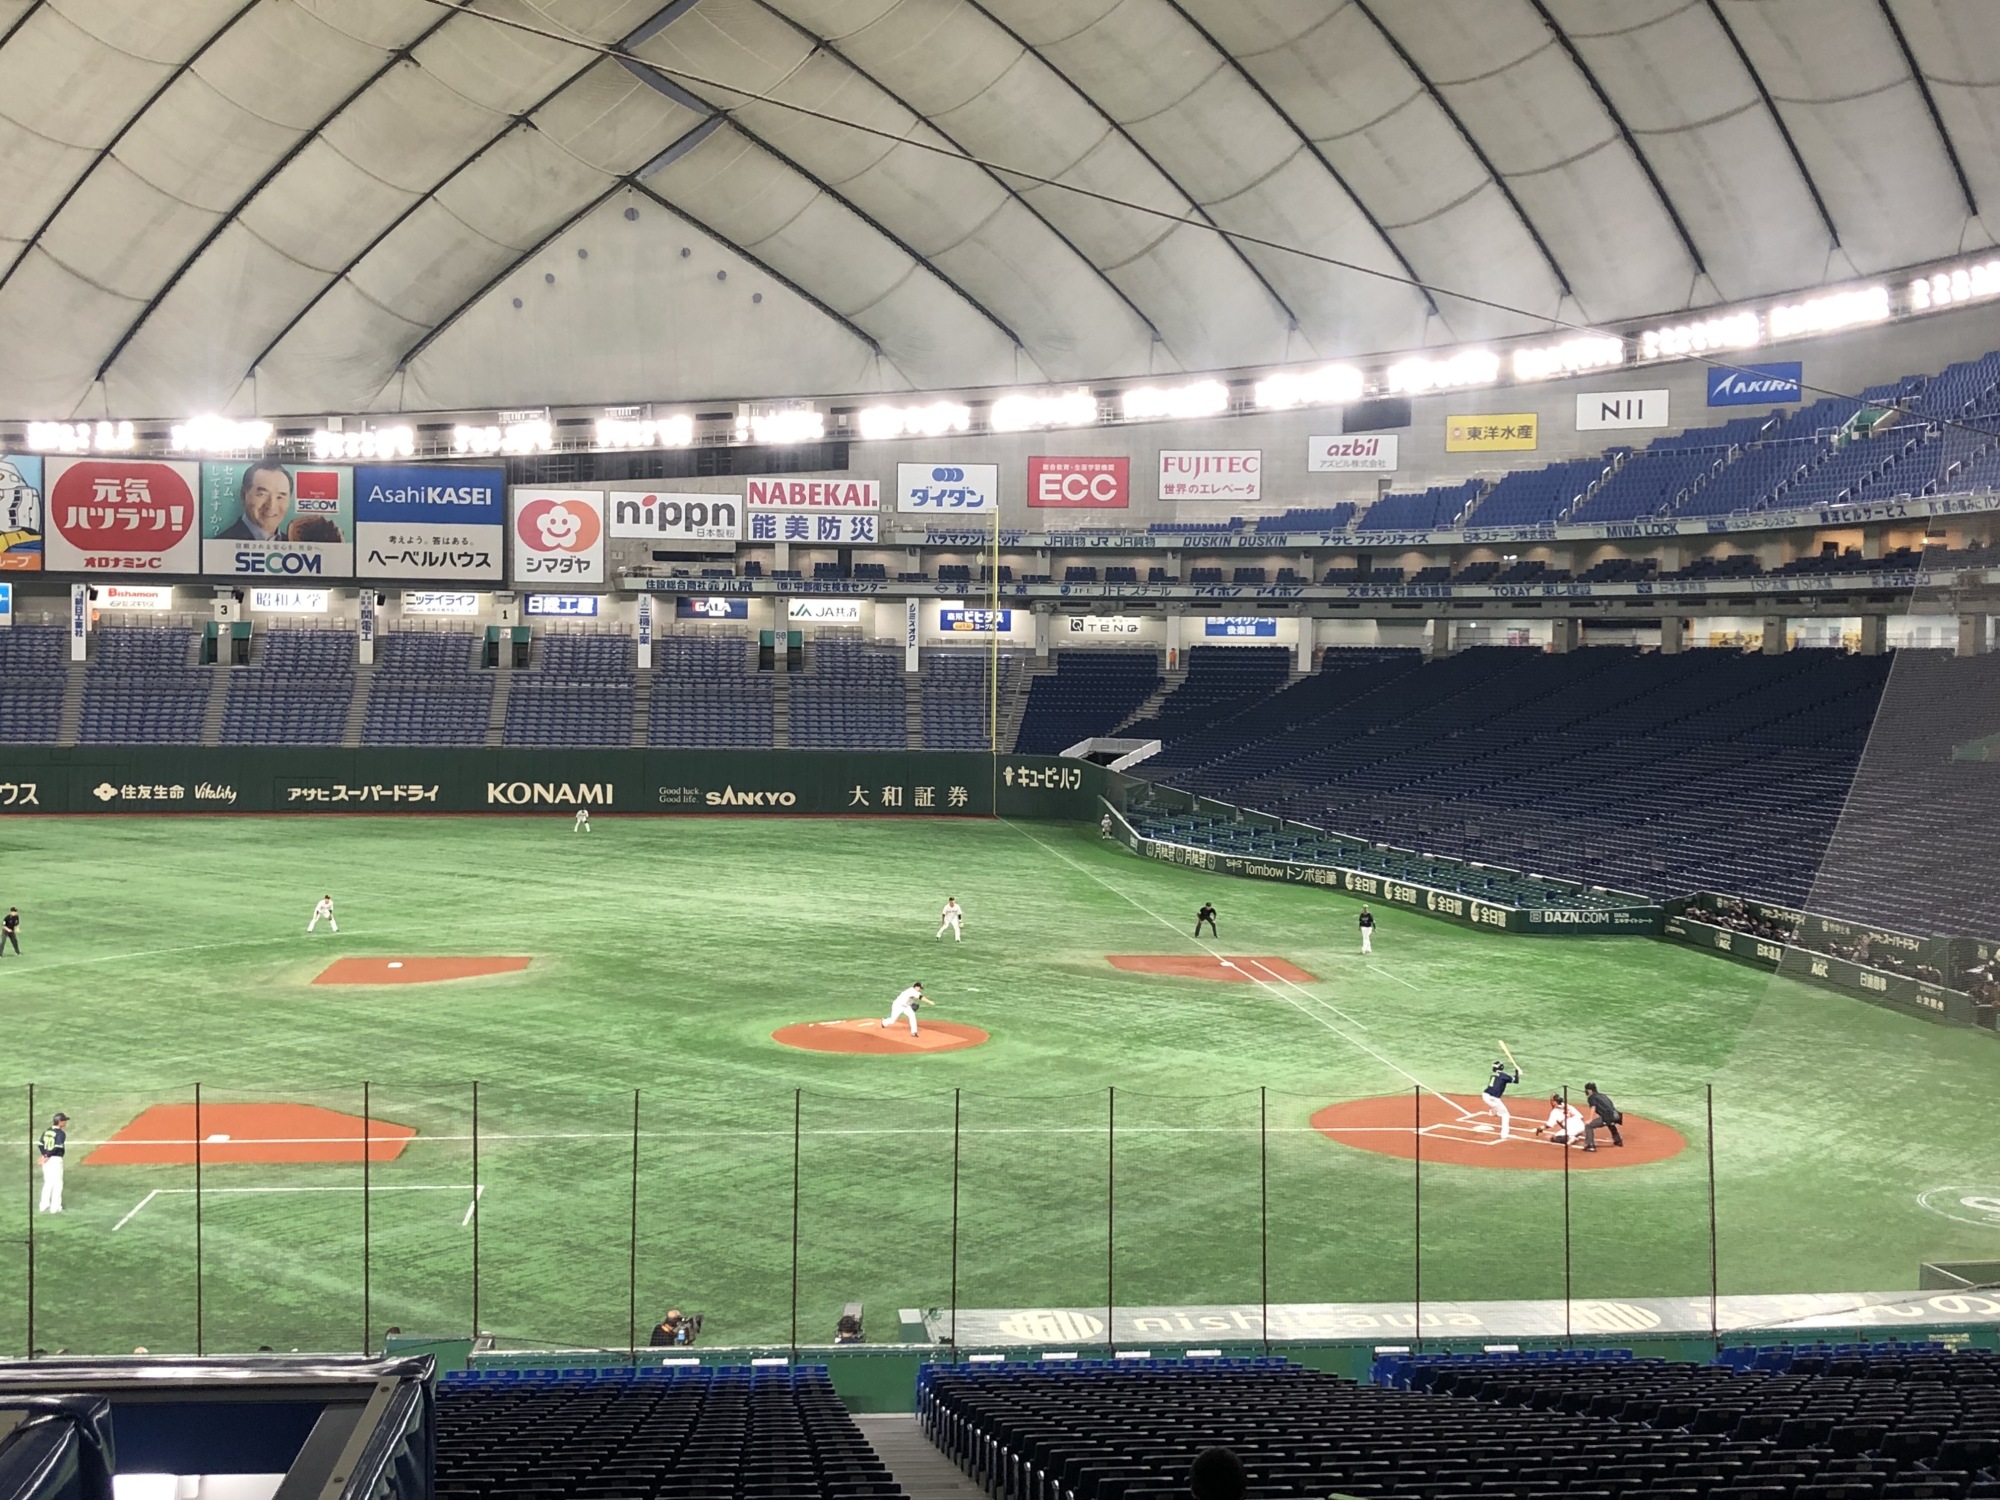 The Yomiuri Giants and Tokyo Yakult Swallows play a spring training game on Saturday without fans in the stands at Tokyo Dome. NPB teams are complying with government wishes to limit large gatherings to help prevent the spread of the COVID-19 virus. | JASON COSKREY